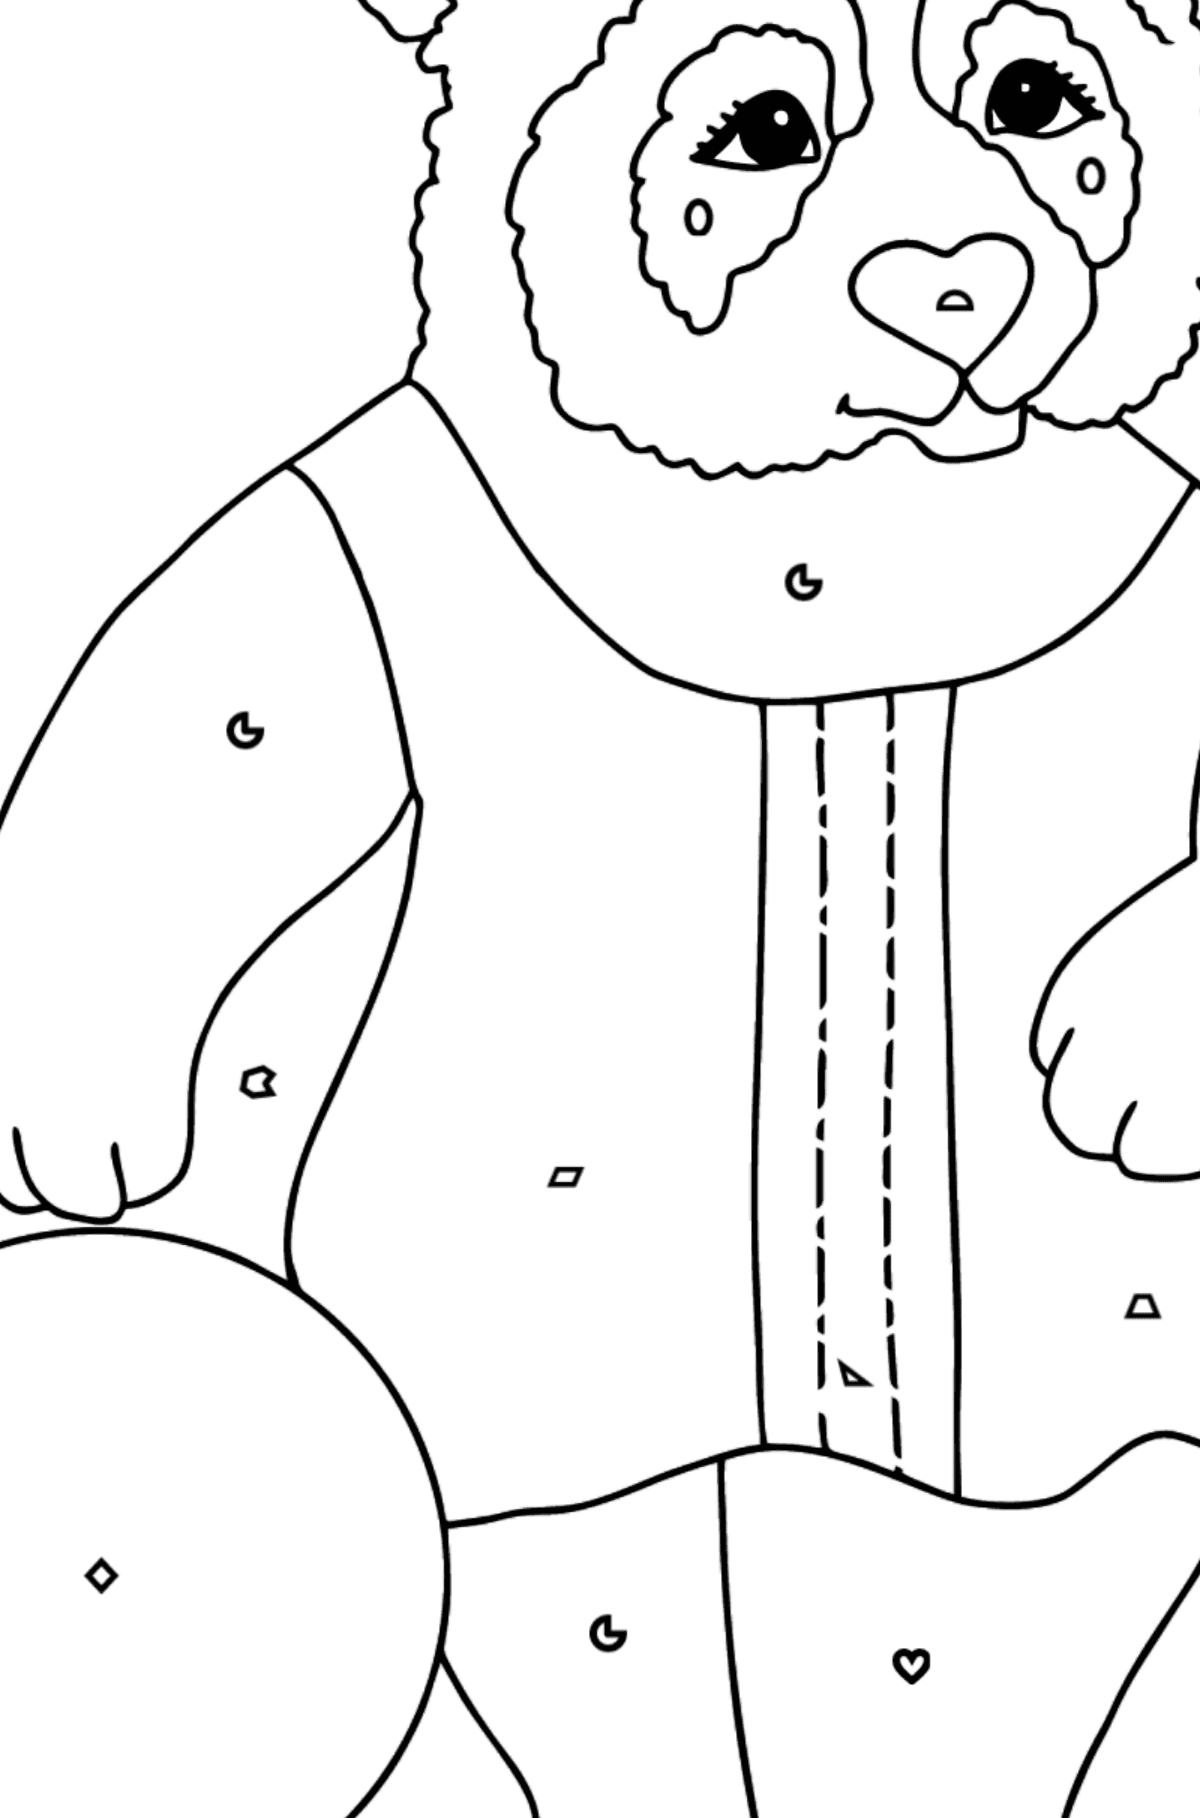 Panda For Babies coloring page - Coloring by Geometric Shapes for Kids